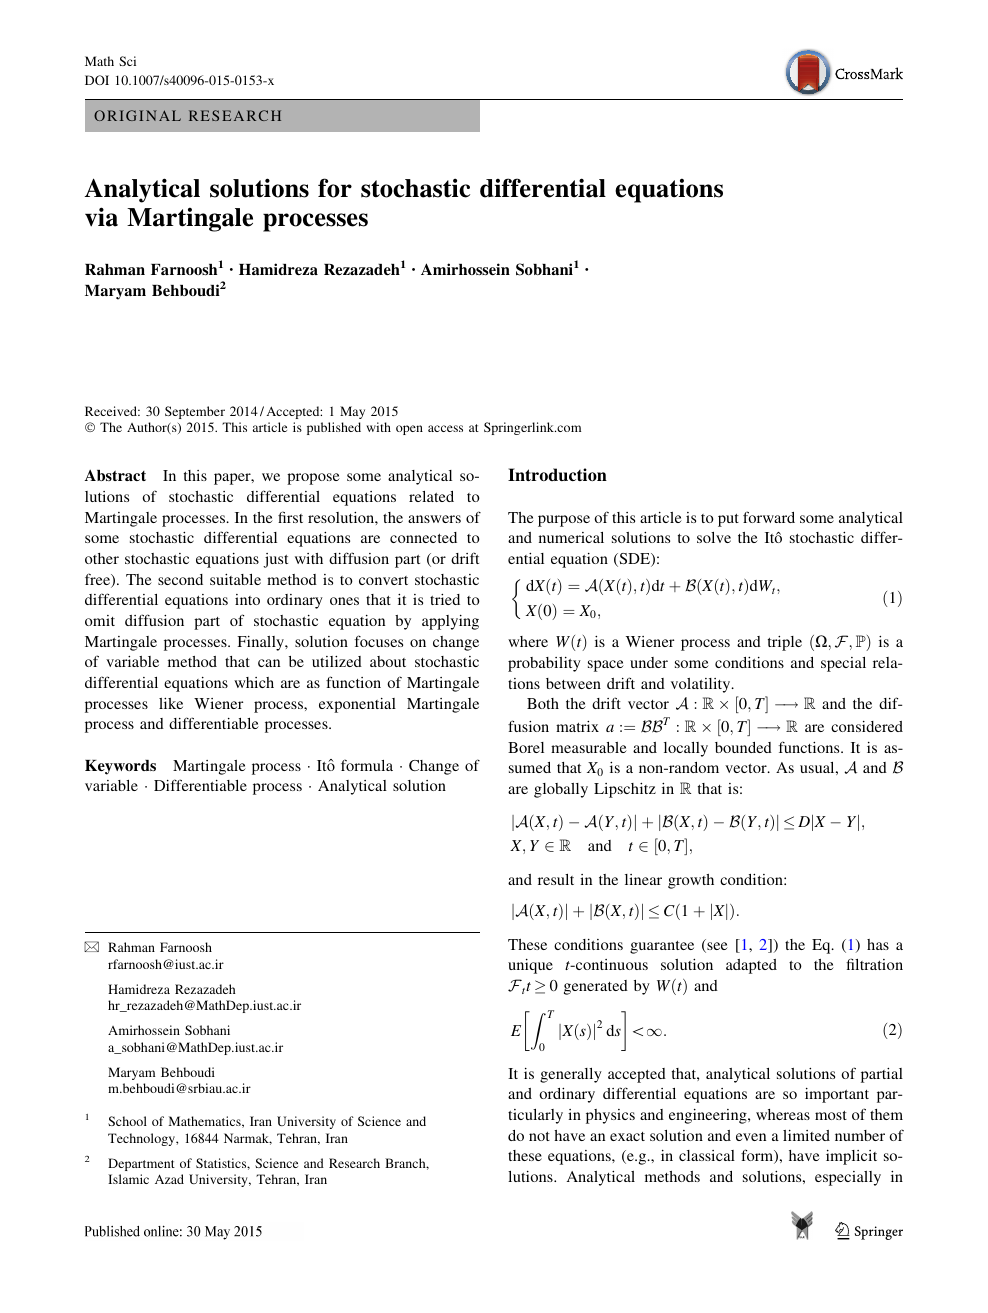 Analytical Solutions For Stochastic Differential Equations Via Martingale Processes Topic Of Research Paper In Mathematics Download Scholarly Article Pdf And Read For Free On Cyberleninka Open Science Hub